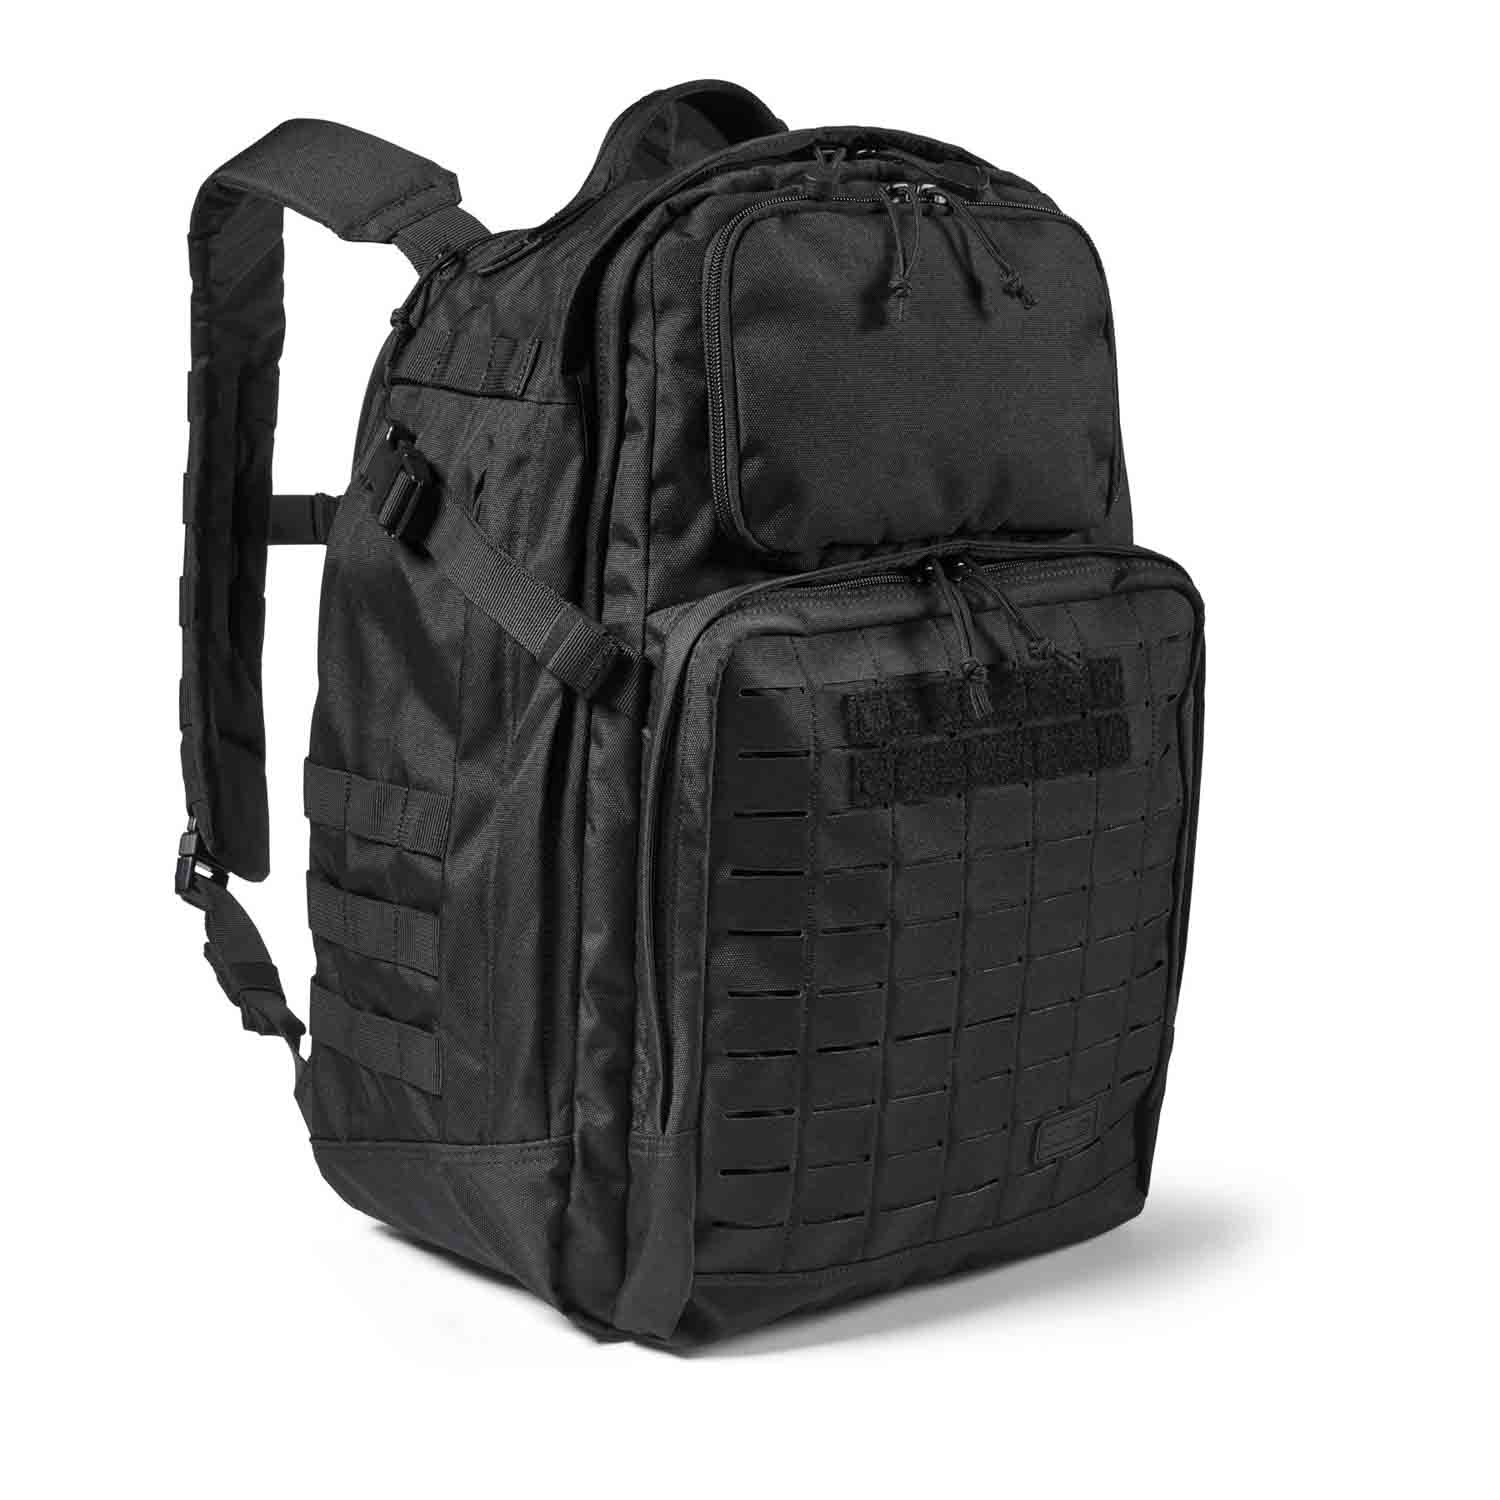 5.11 Tactical Fast-Tac 24 Backpack Bags, Packs and Cases 5.11 Tactical Black Tactical Gear Supplier Tactical Distributors Australia